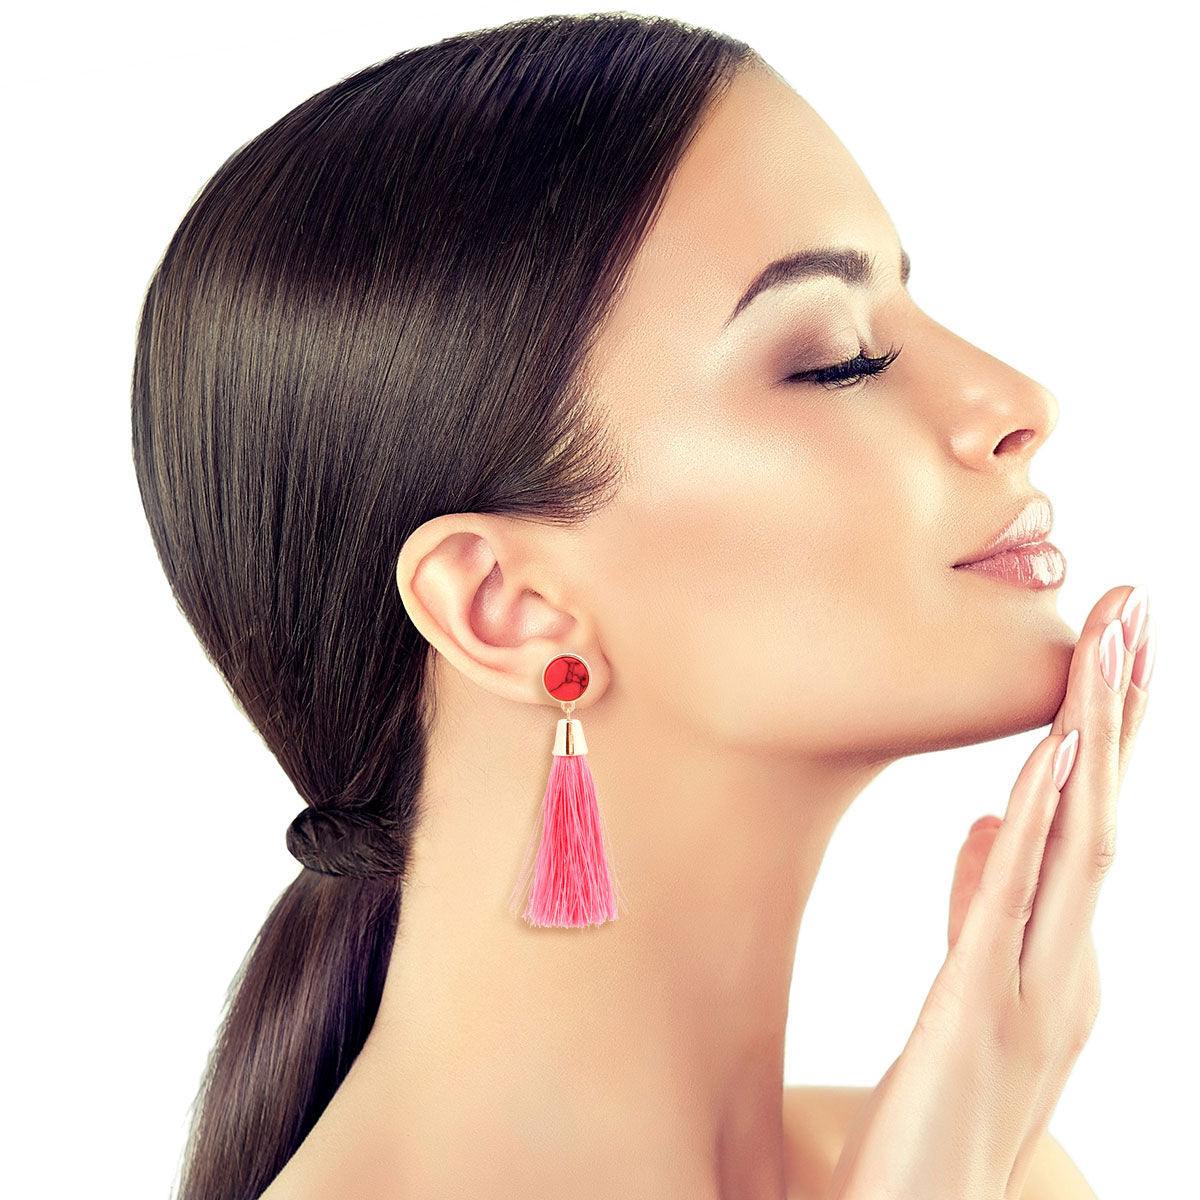 Trendy Women's Tassel Earrings - Perfect Pink Accessory for Every Outfit!